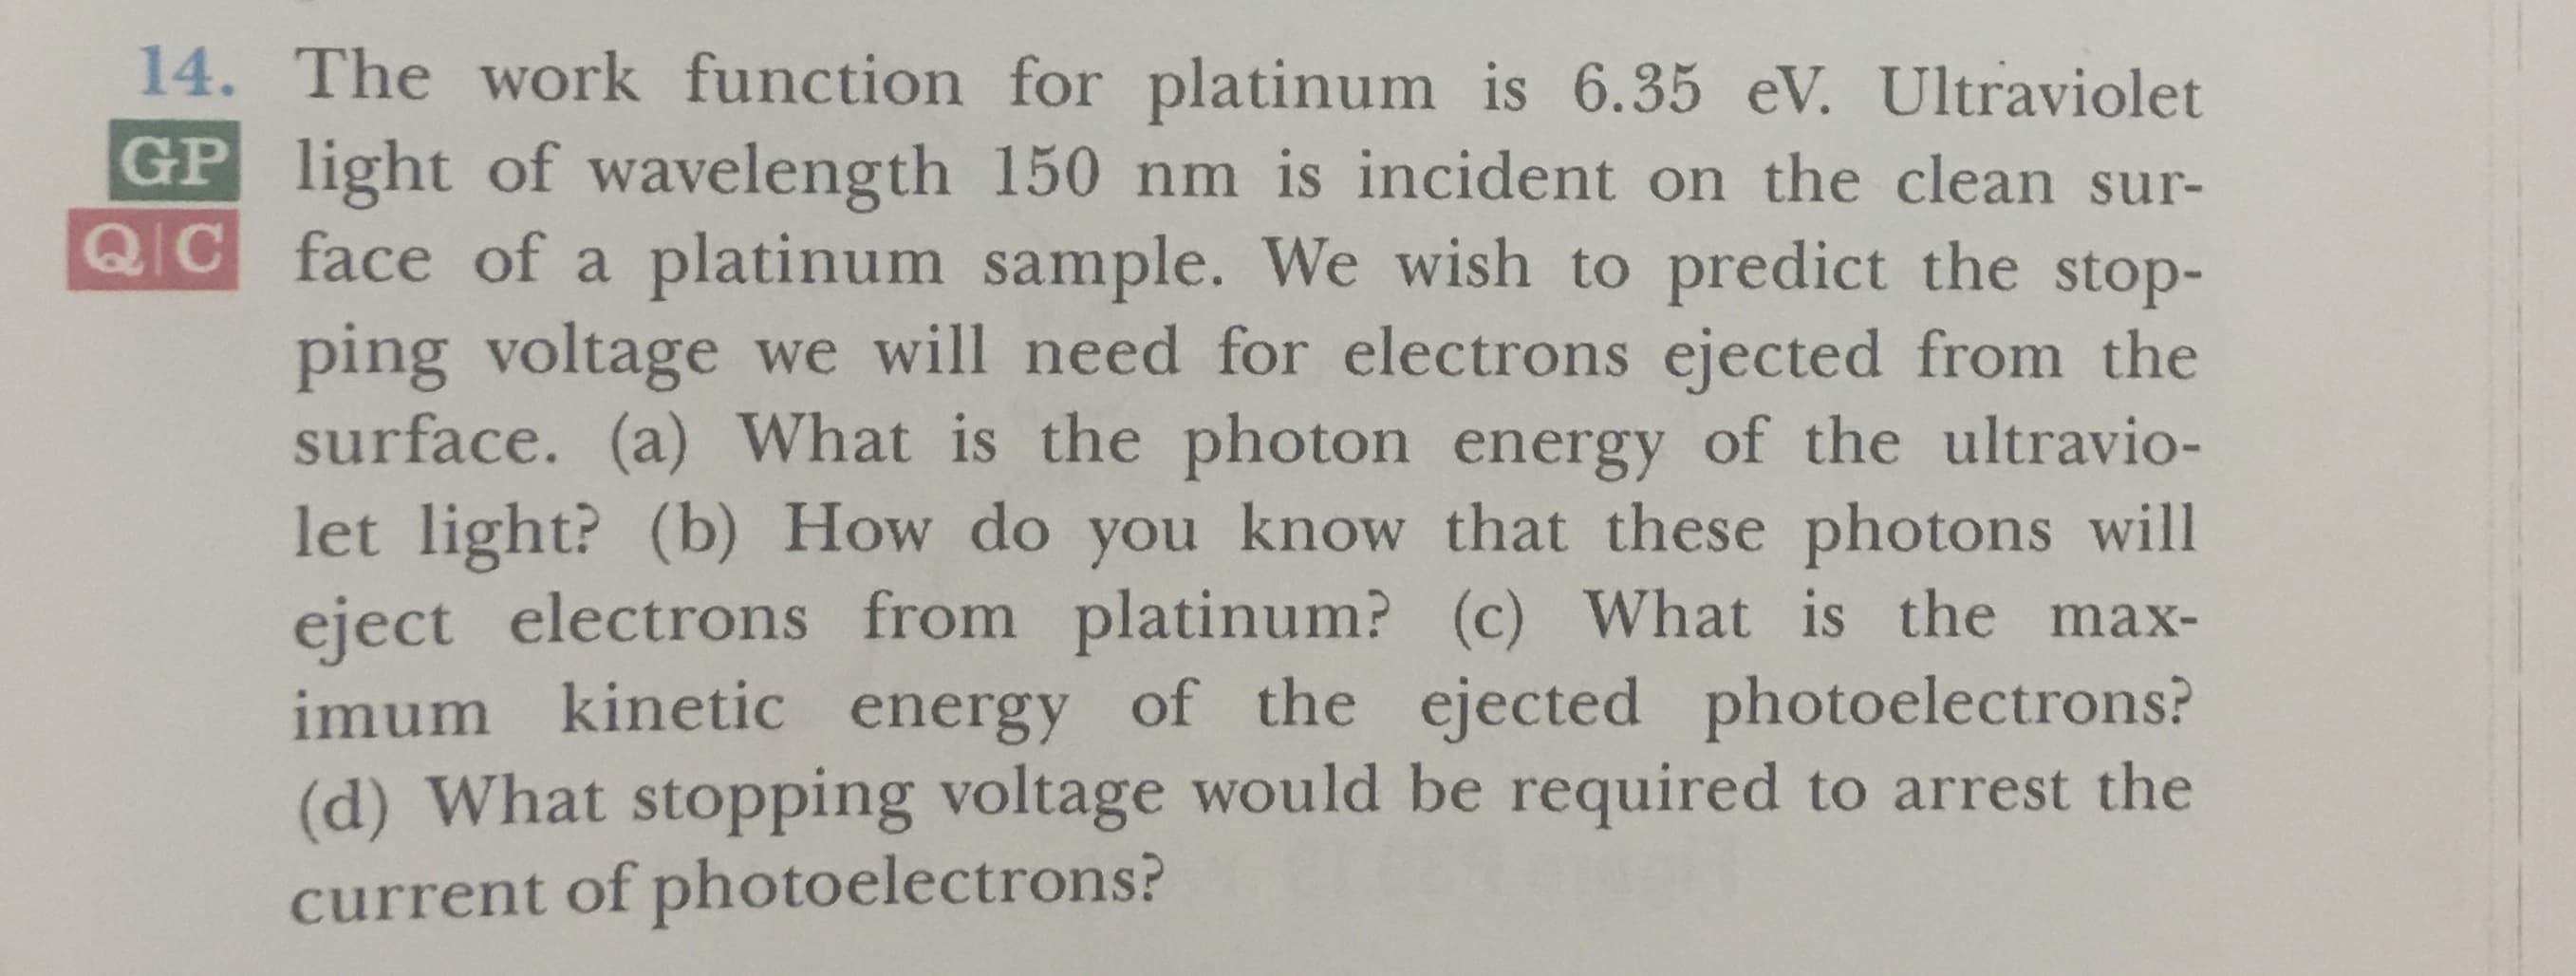 14. The work function for platinum is 6.35 eV. Ultraviolet
GP light of wavelength 150 nm is incident on the clean sur-
Q C face of a platinum sample. We wish to predict the stop-
ping voltage we will need for electrons ejected from the
surface. (a) What is the photon energy of the ultravio-
let light? (b) How do you know that these photons will
eject electrons from platinum? (c) What is the
imum kinetic energy of the ejected photoelectrons?
(d) What stopping voltage would be required to arrest the
current of photoelectrons ?
max-
